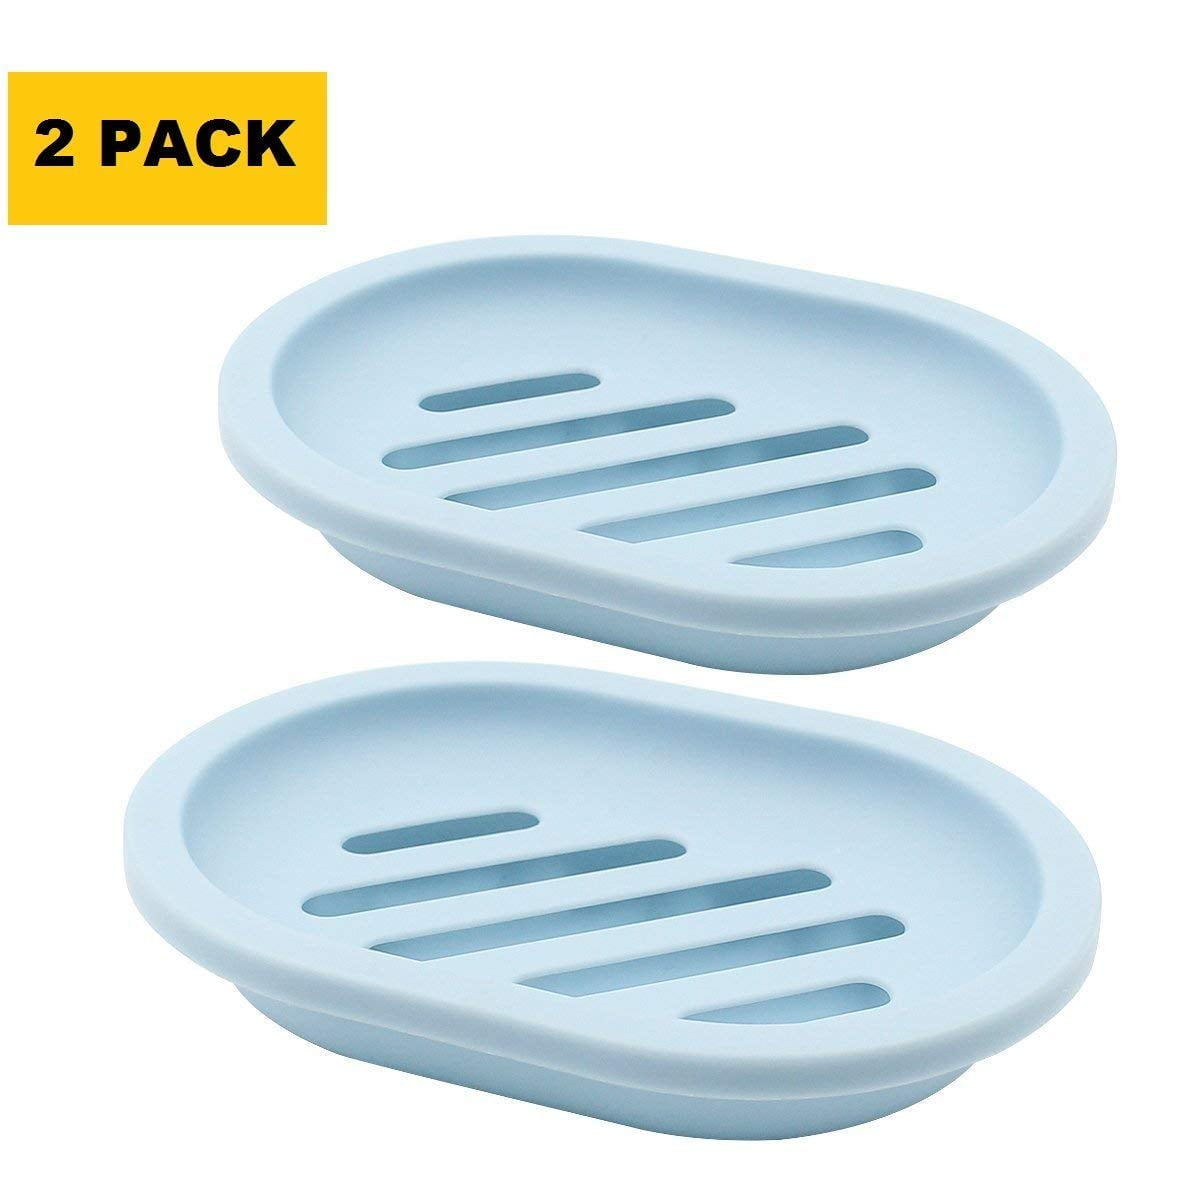 Oval Shaped Small Pack of 2 Clear Plastic idesign Soap Savers Dish / Holder 